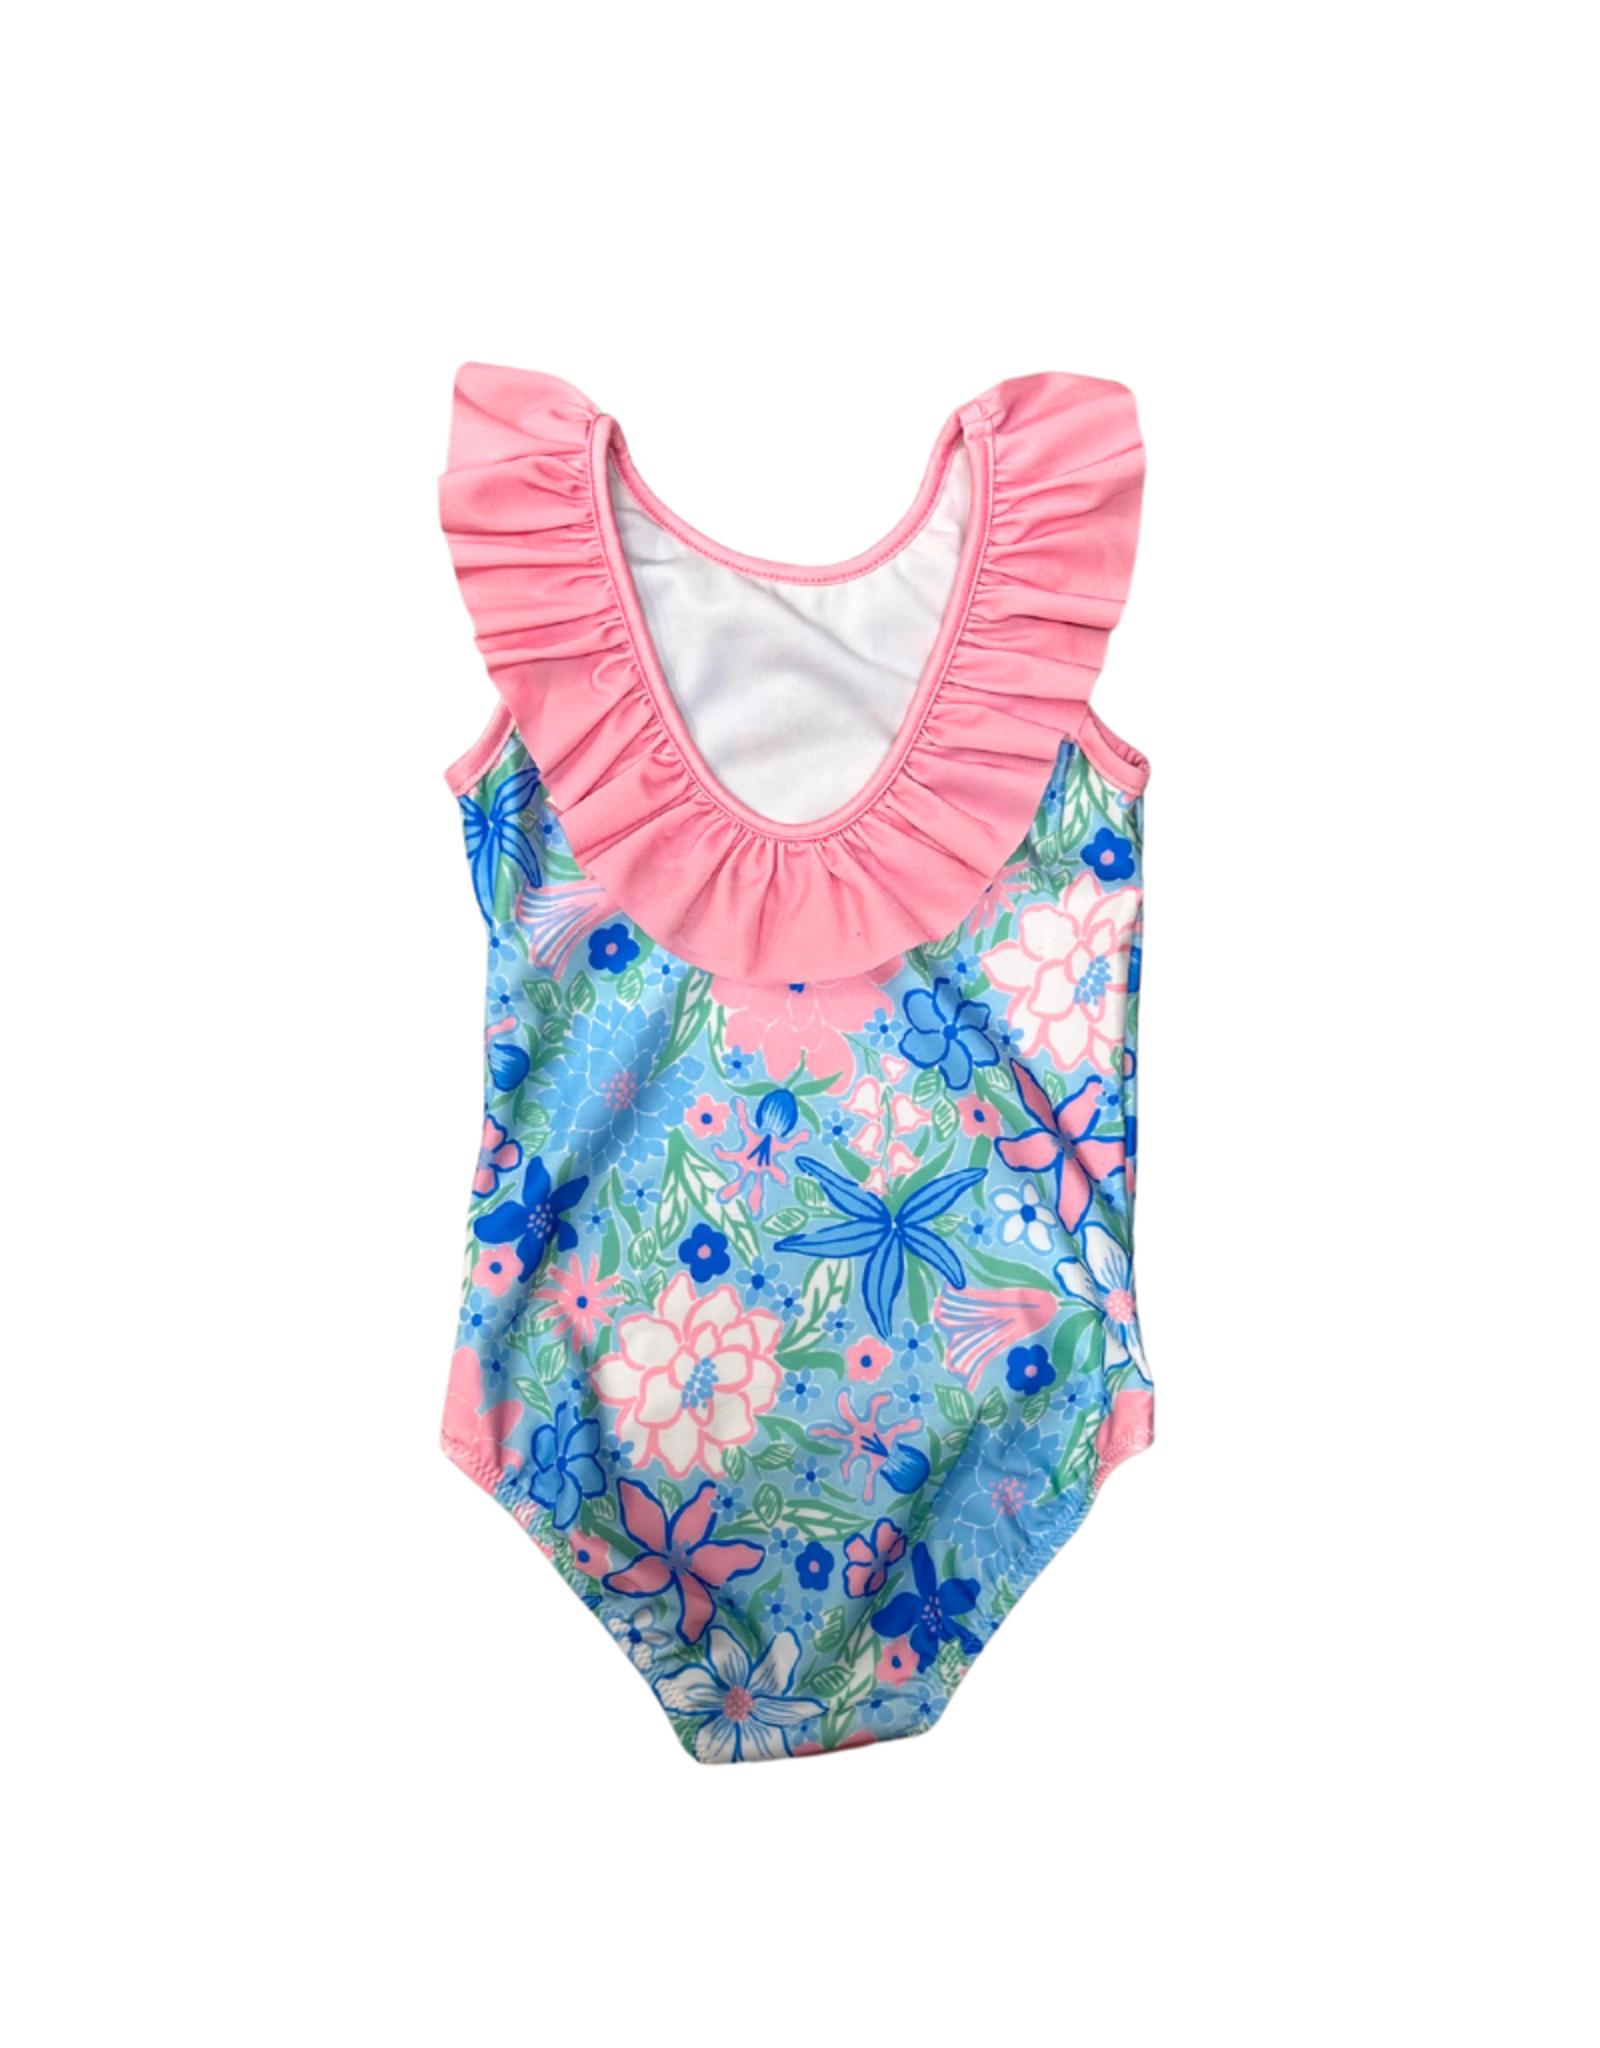 The Bailey Boys Floral Spandex Swimsuit w/ Pink Ruffle